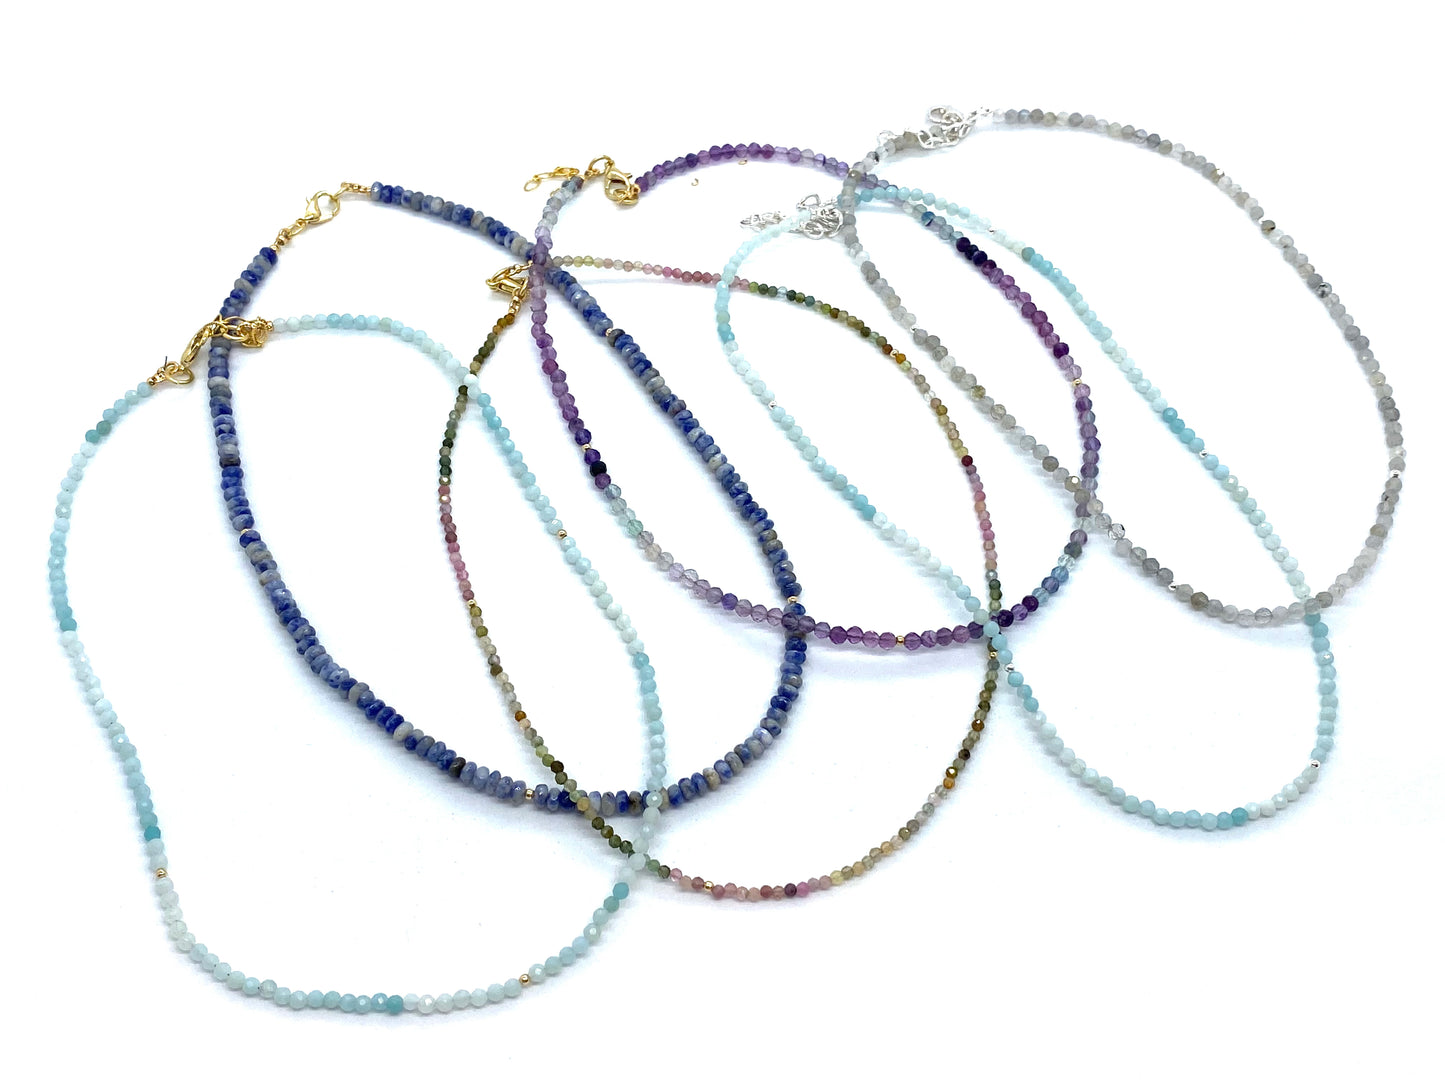 Short gemstone necklaces - Emmis Jewelry, Necklace, [product_color]